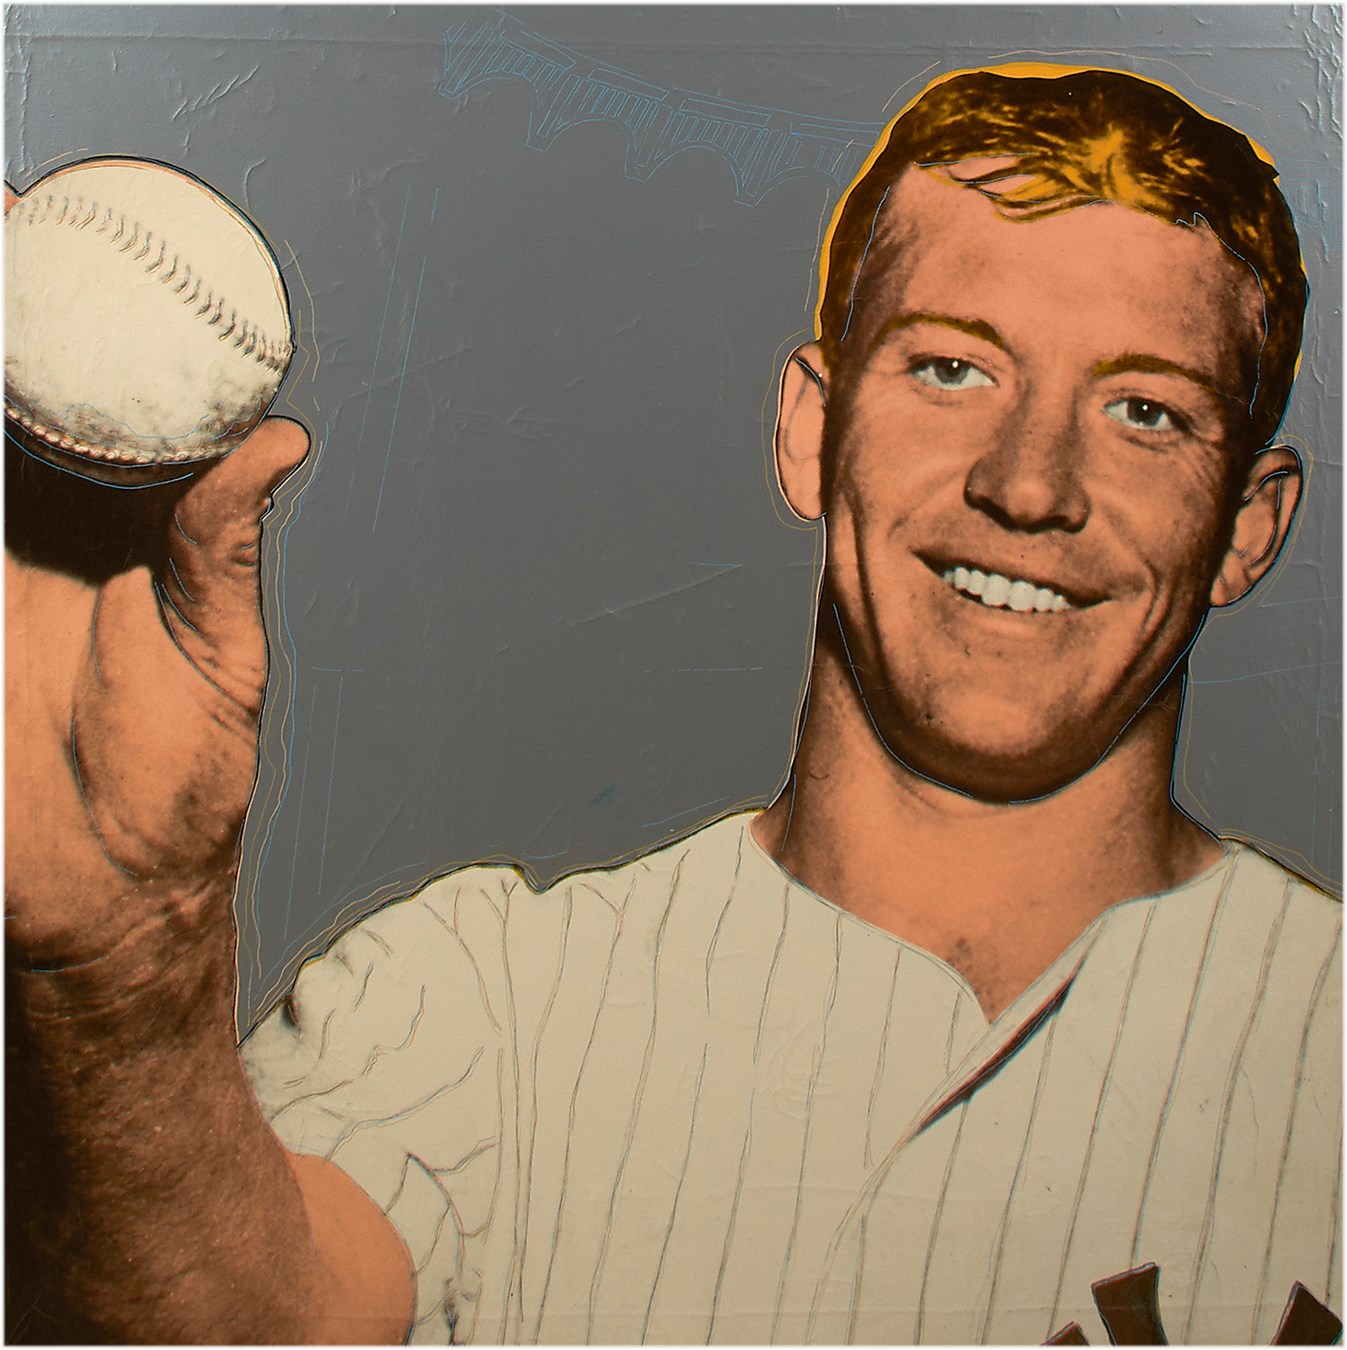 Mickey Mantle Handpainted Oil Over Silkscreen Painting by Steve Kaufman - Mickey's Personal Copy That Hung on His Wall